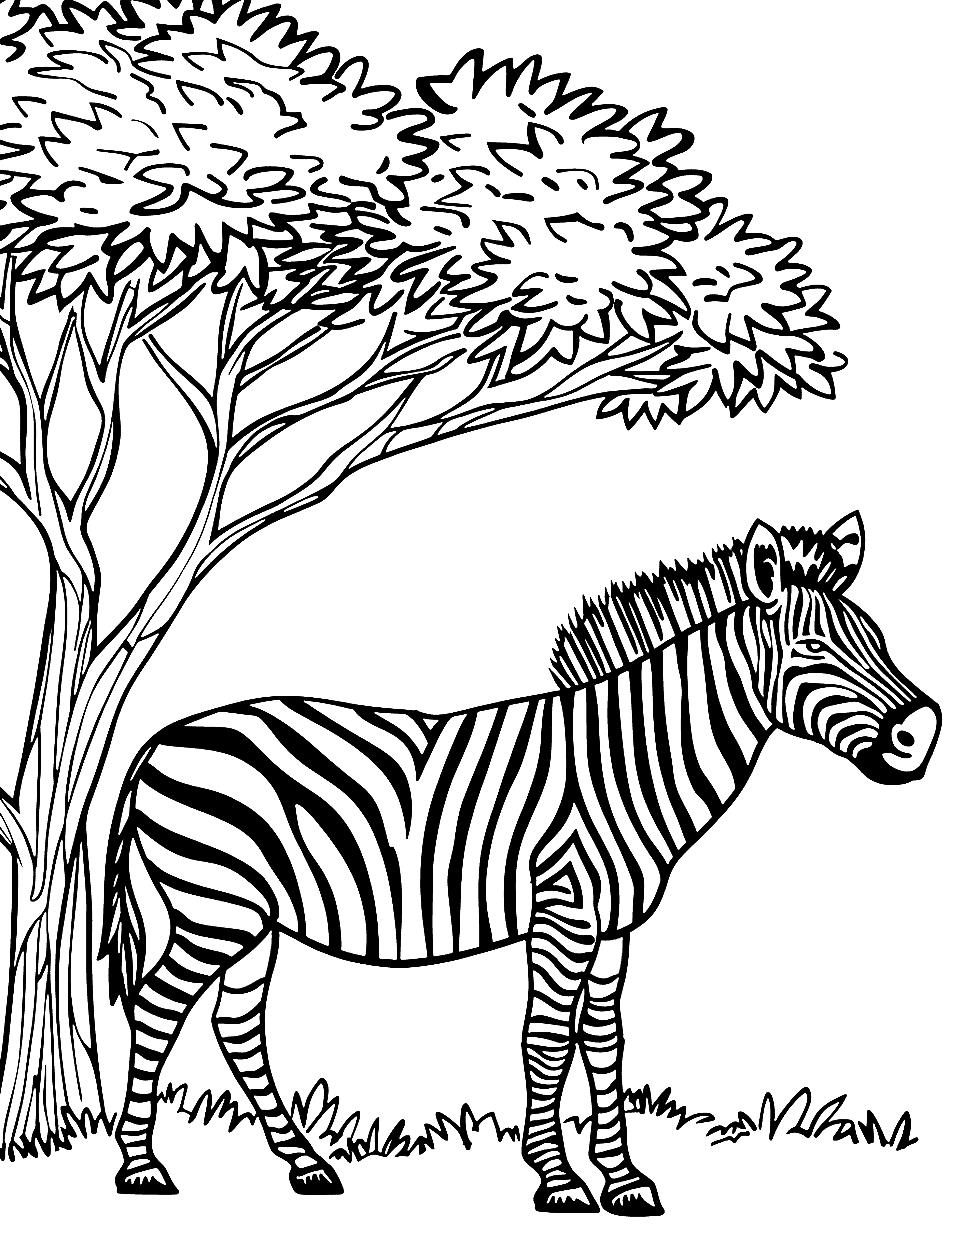 Zebra Under the Acacia Tree Coloring Page - A zebra resting in the shade of a large acacia tree.